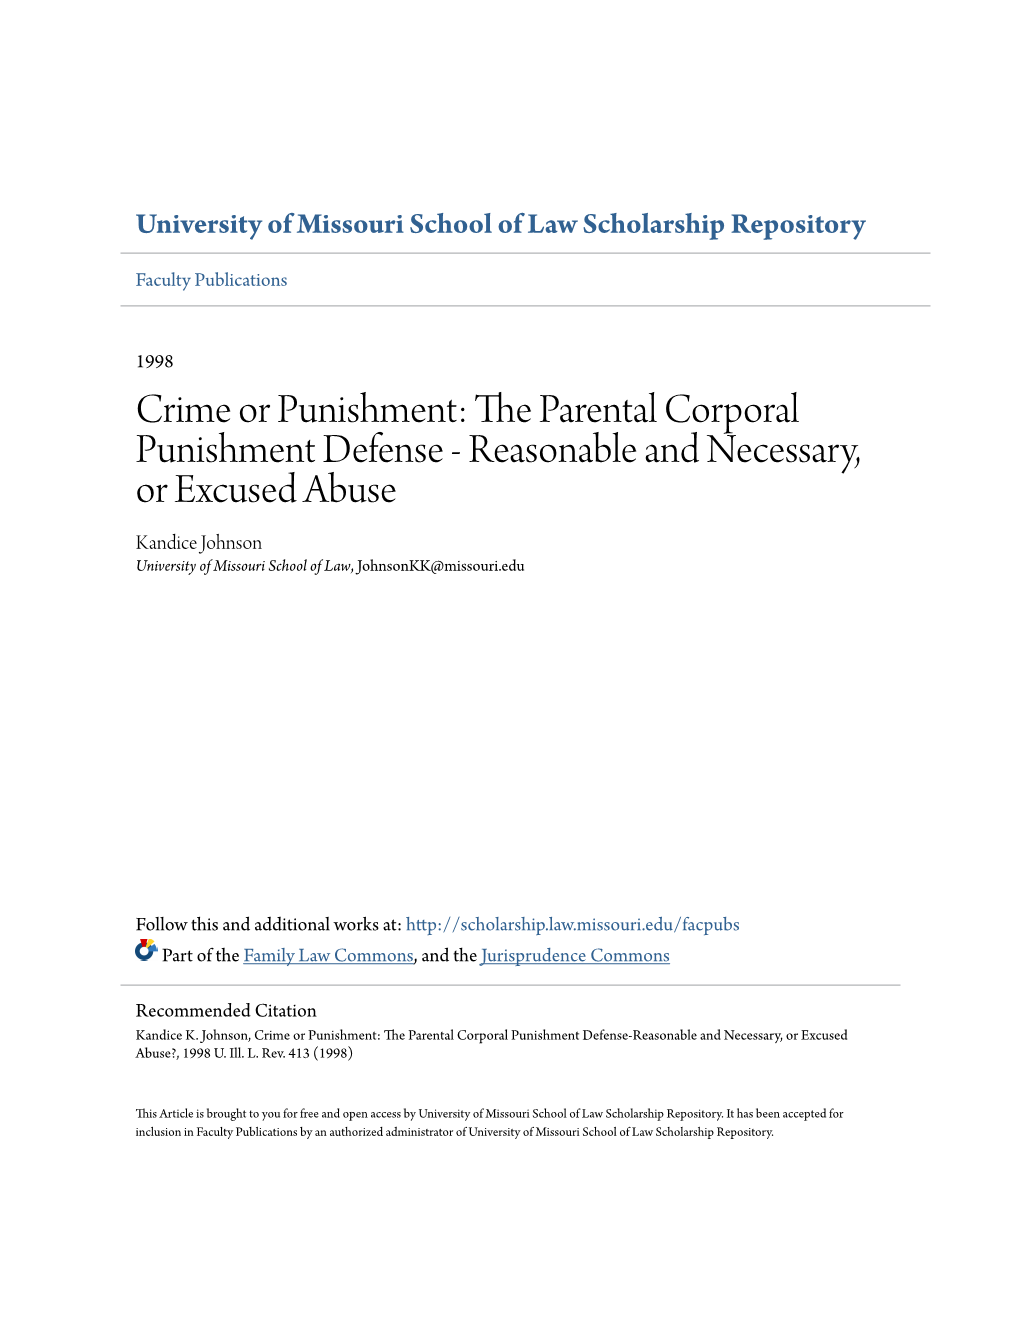 THE PARENTAL CORPORAL PUNISHMENT DEFENSE-REASONABLE and NECESSARY, OR EXCUSED ABUSE? Kandice K